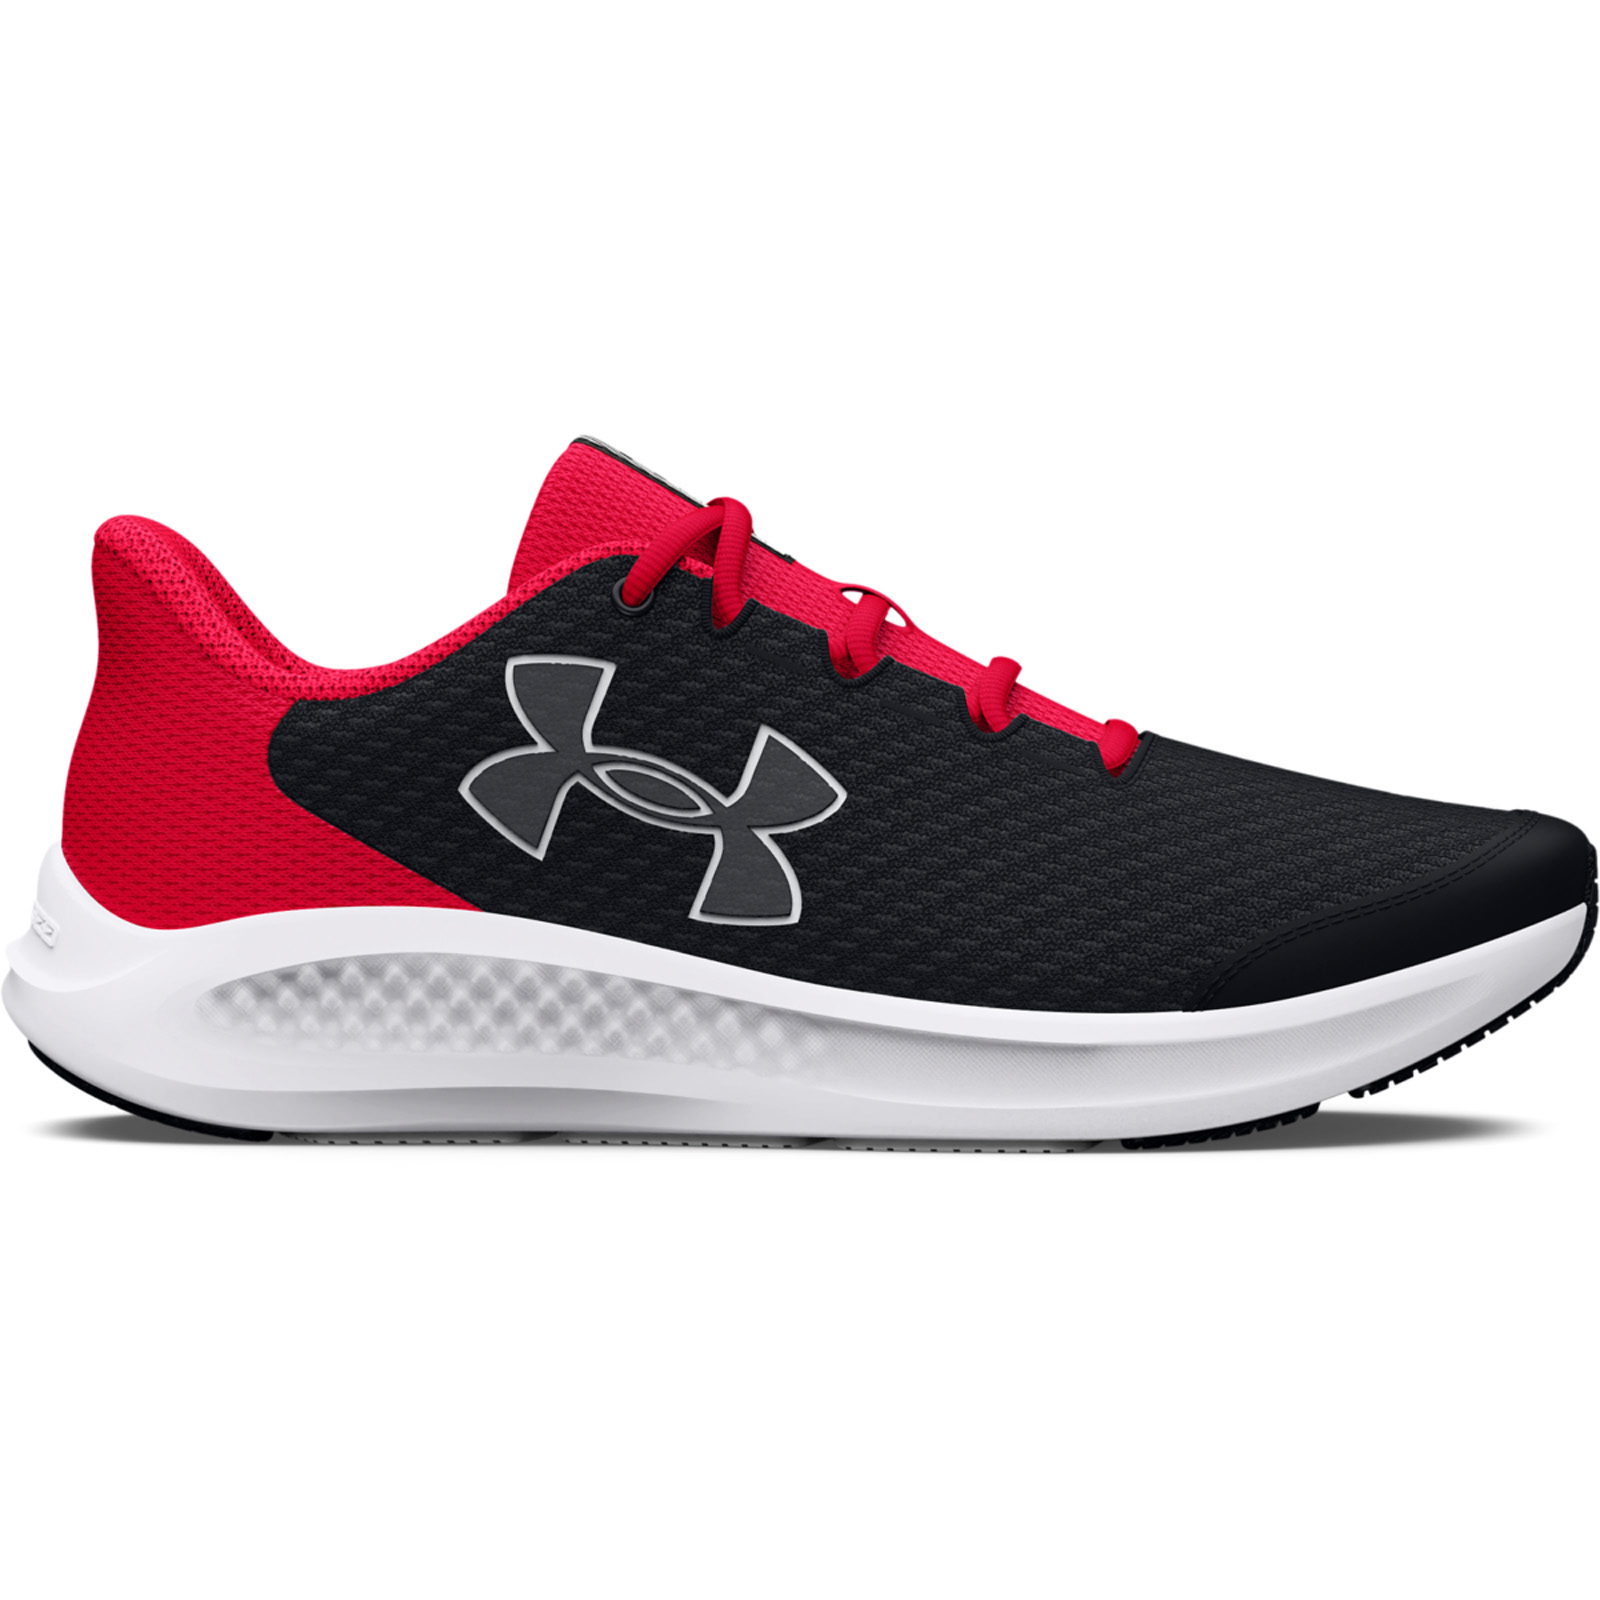 Under Armour - Boys' Grade School UA Charged Pursuit 3 Big Logo Running Shoes - Black/Red/White